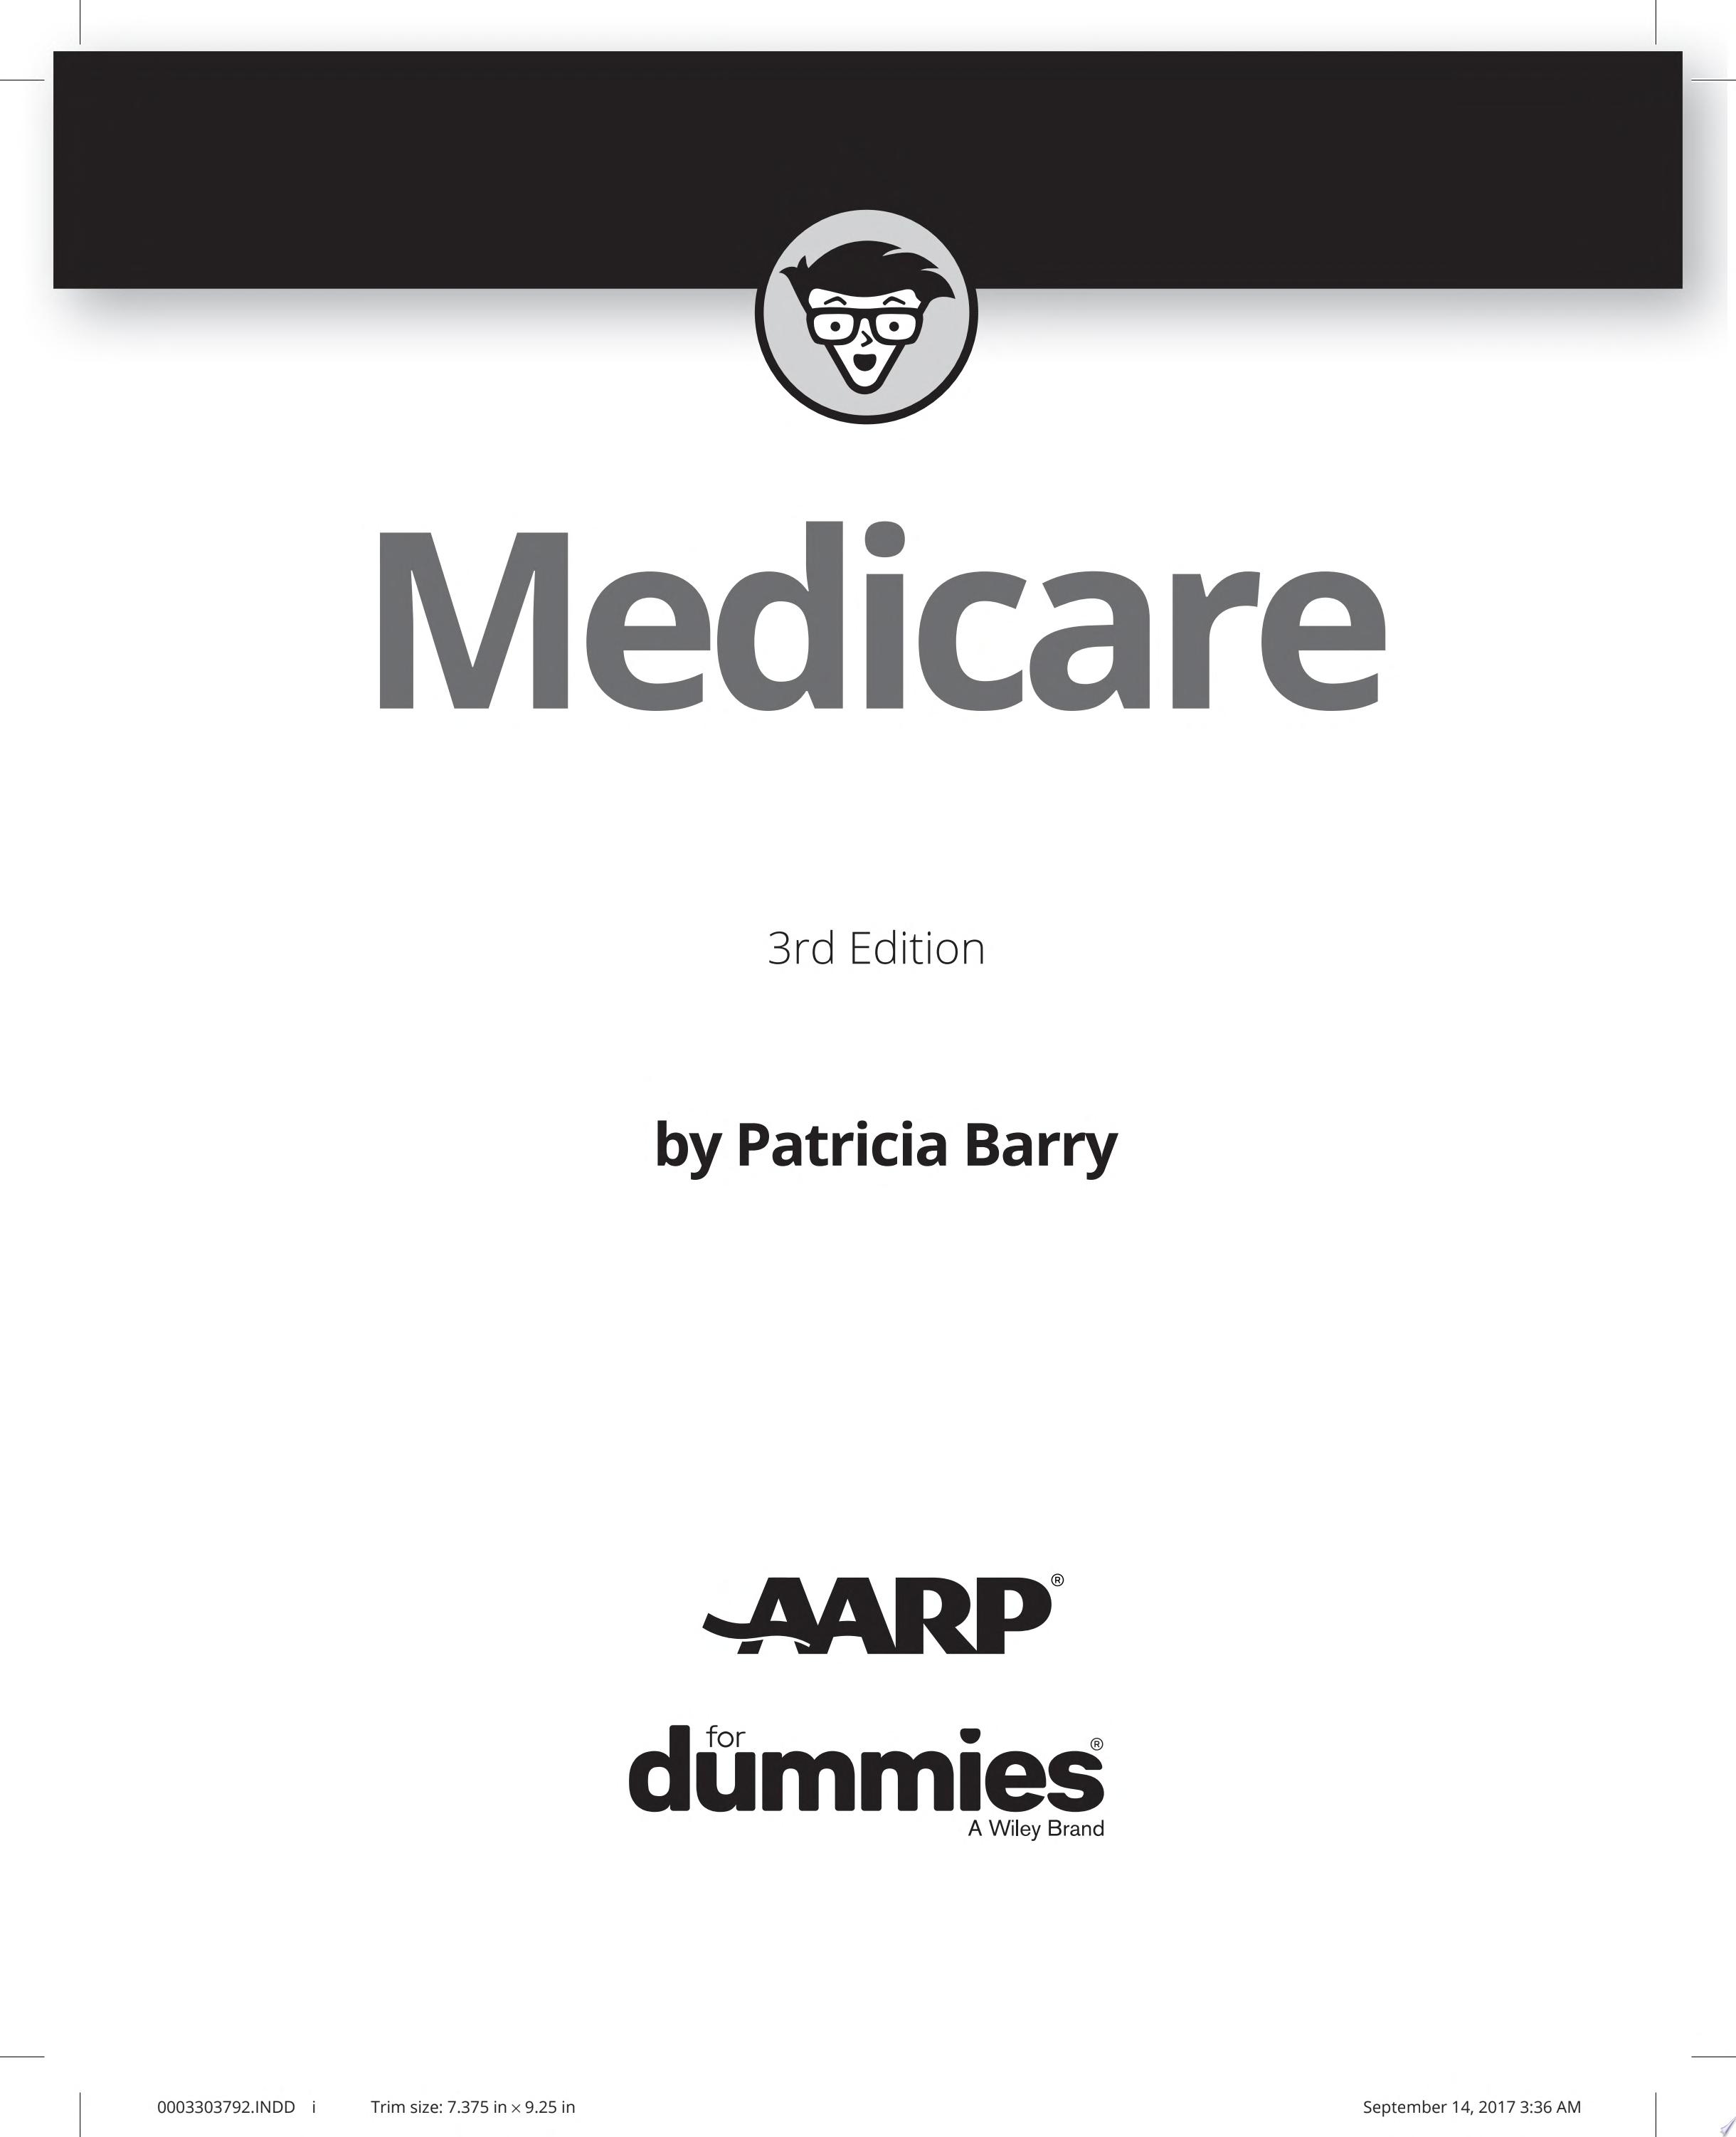 Image for "Medicare For Dummies"